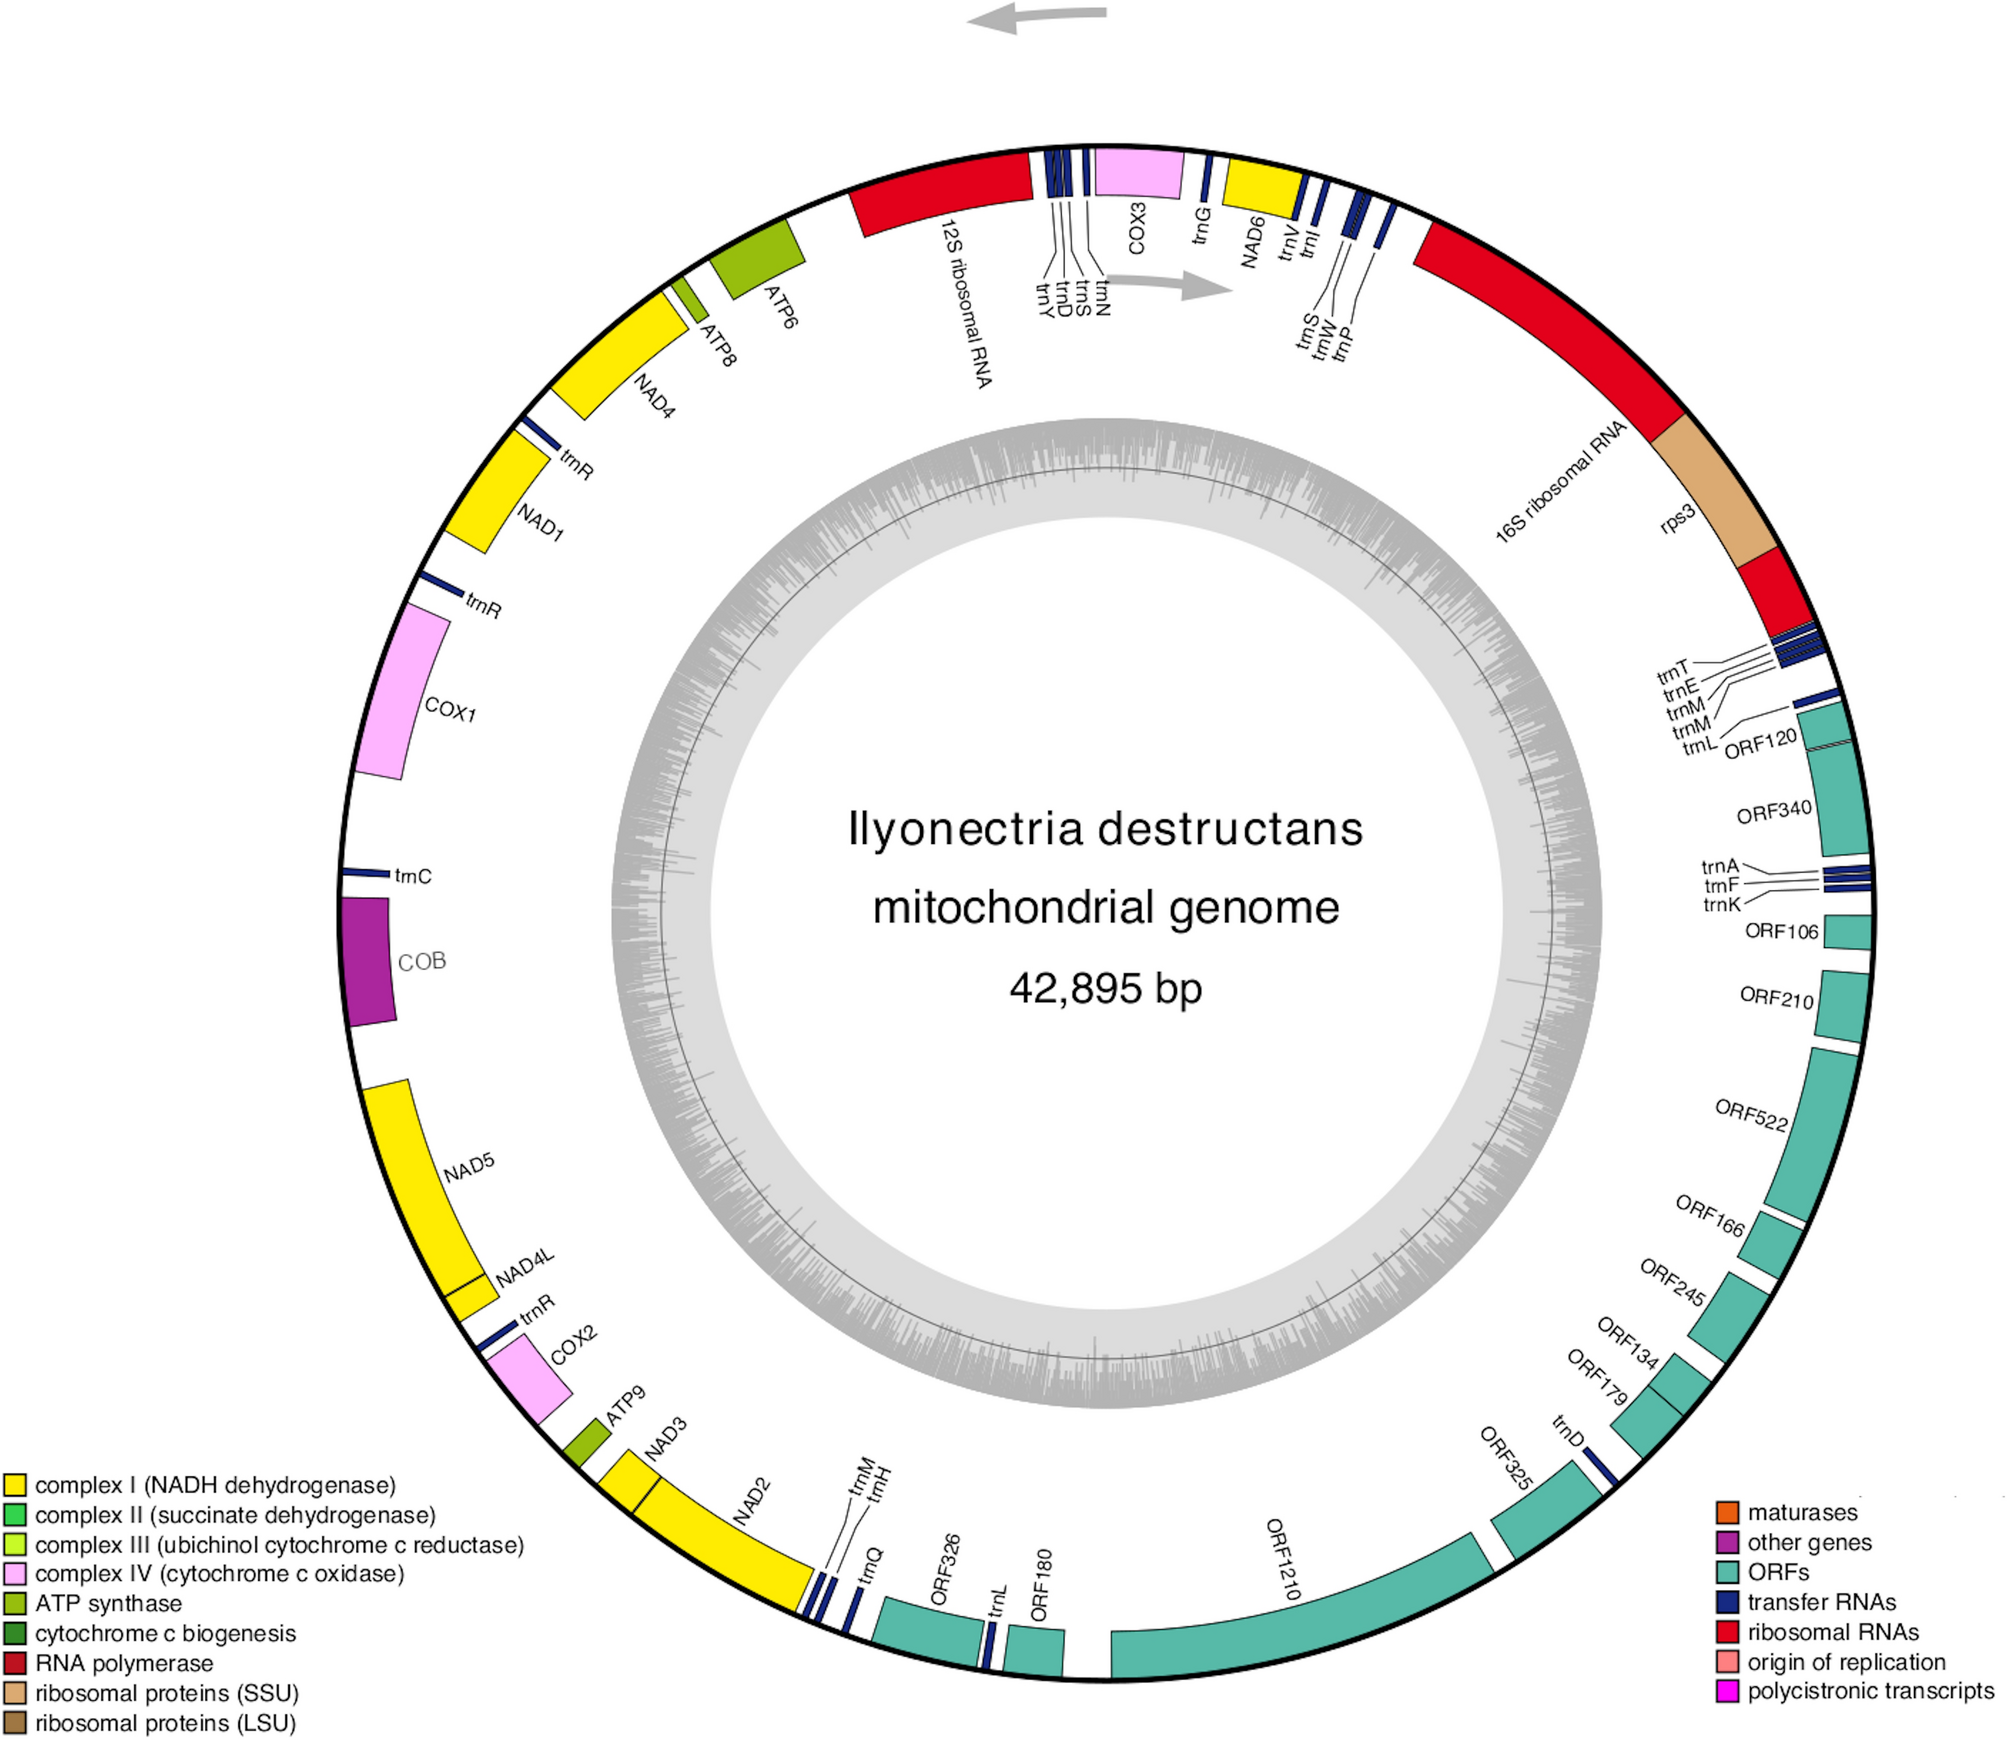 Characterization and phylogenetic analysis of the complete mitochondrial  genome of the pathogenic fungus Ilyonectria destructans | Scientific Reports